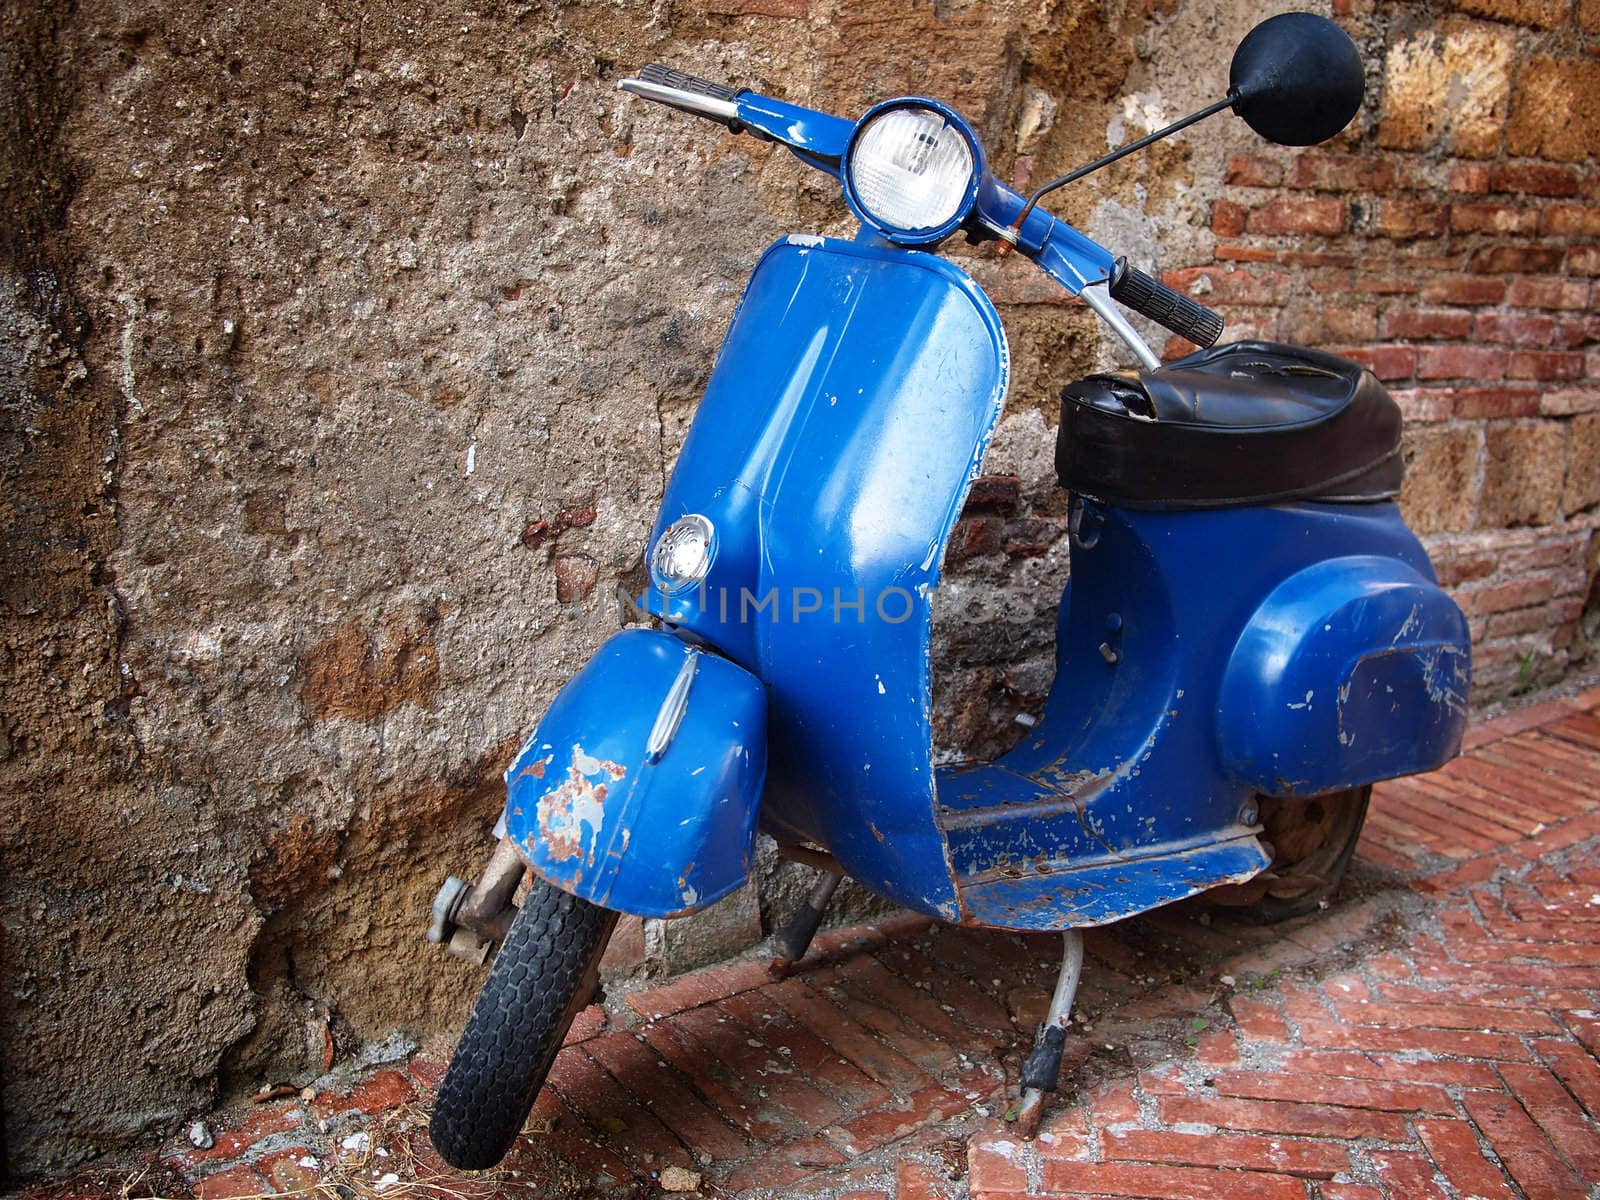 Vintage scooter in front of a brick wall by pljvv